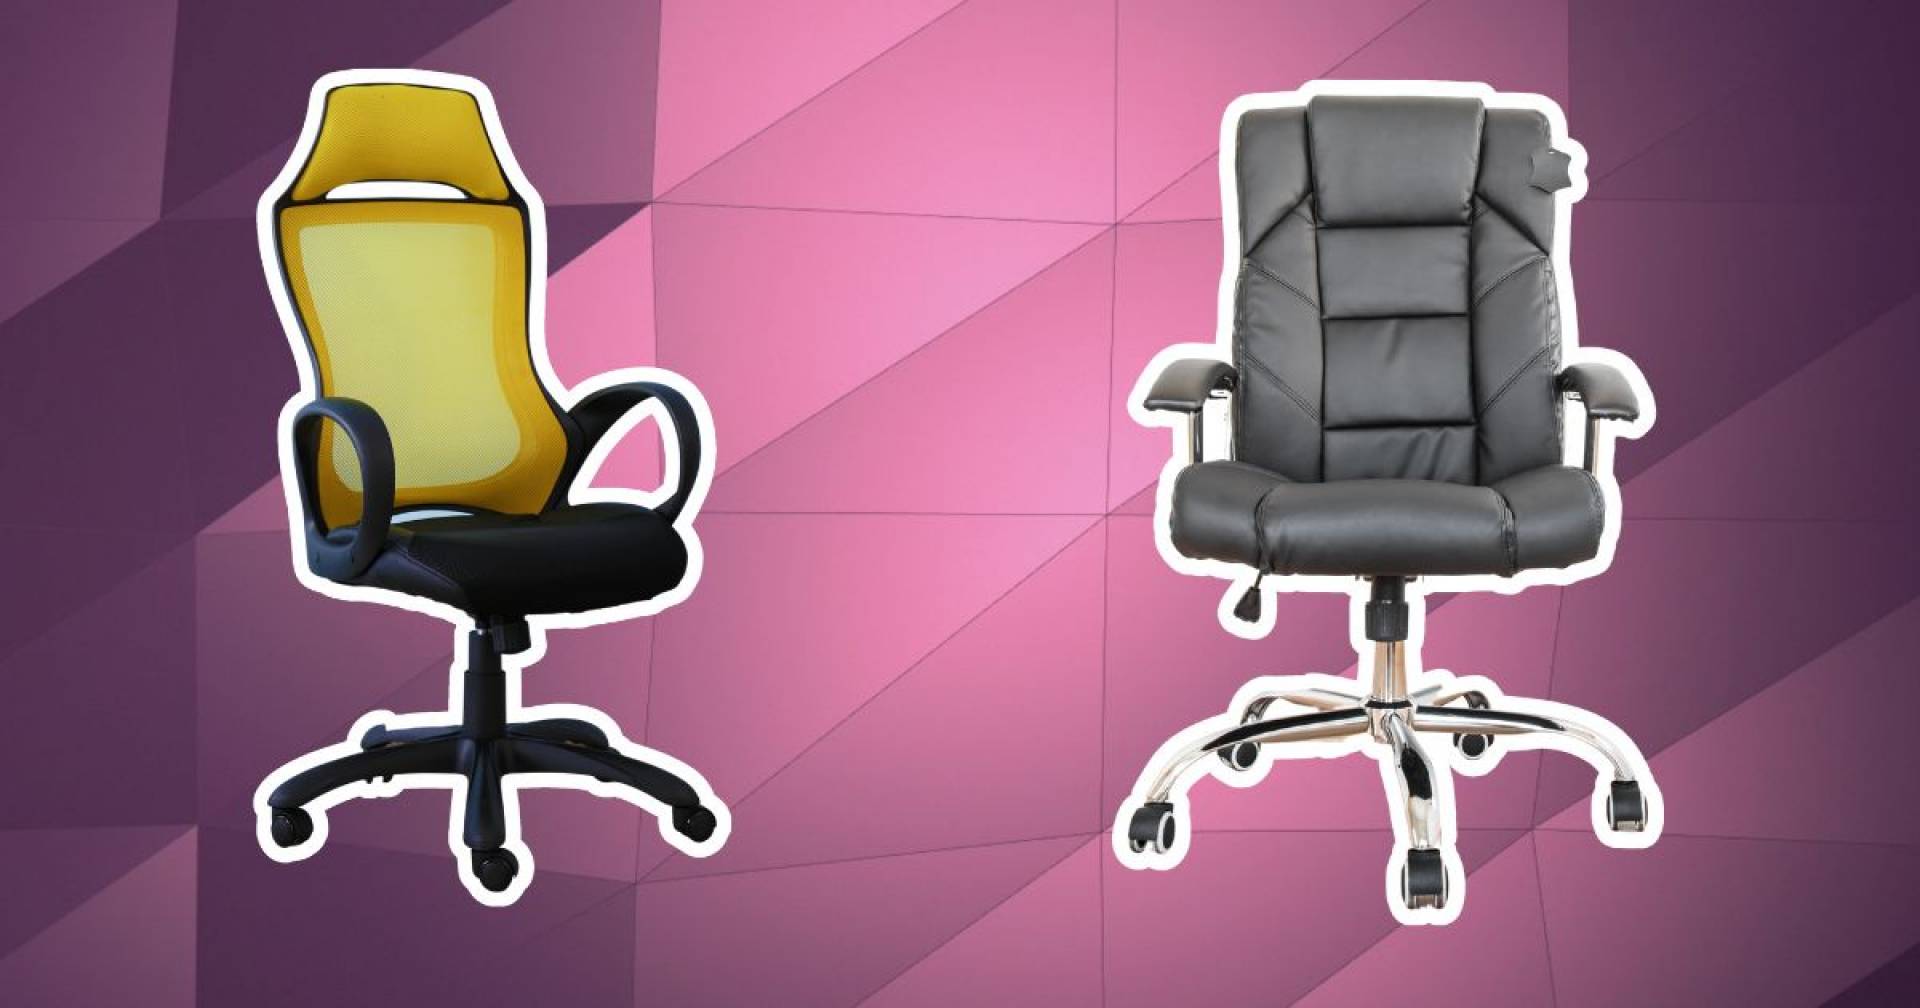 Best Quality Office Chair 1677637595 1920 60 